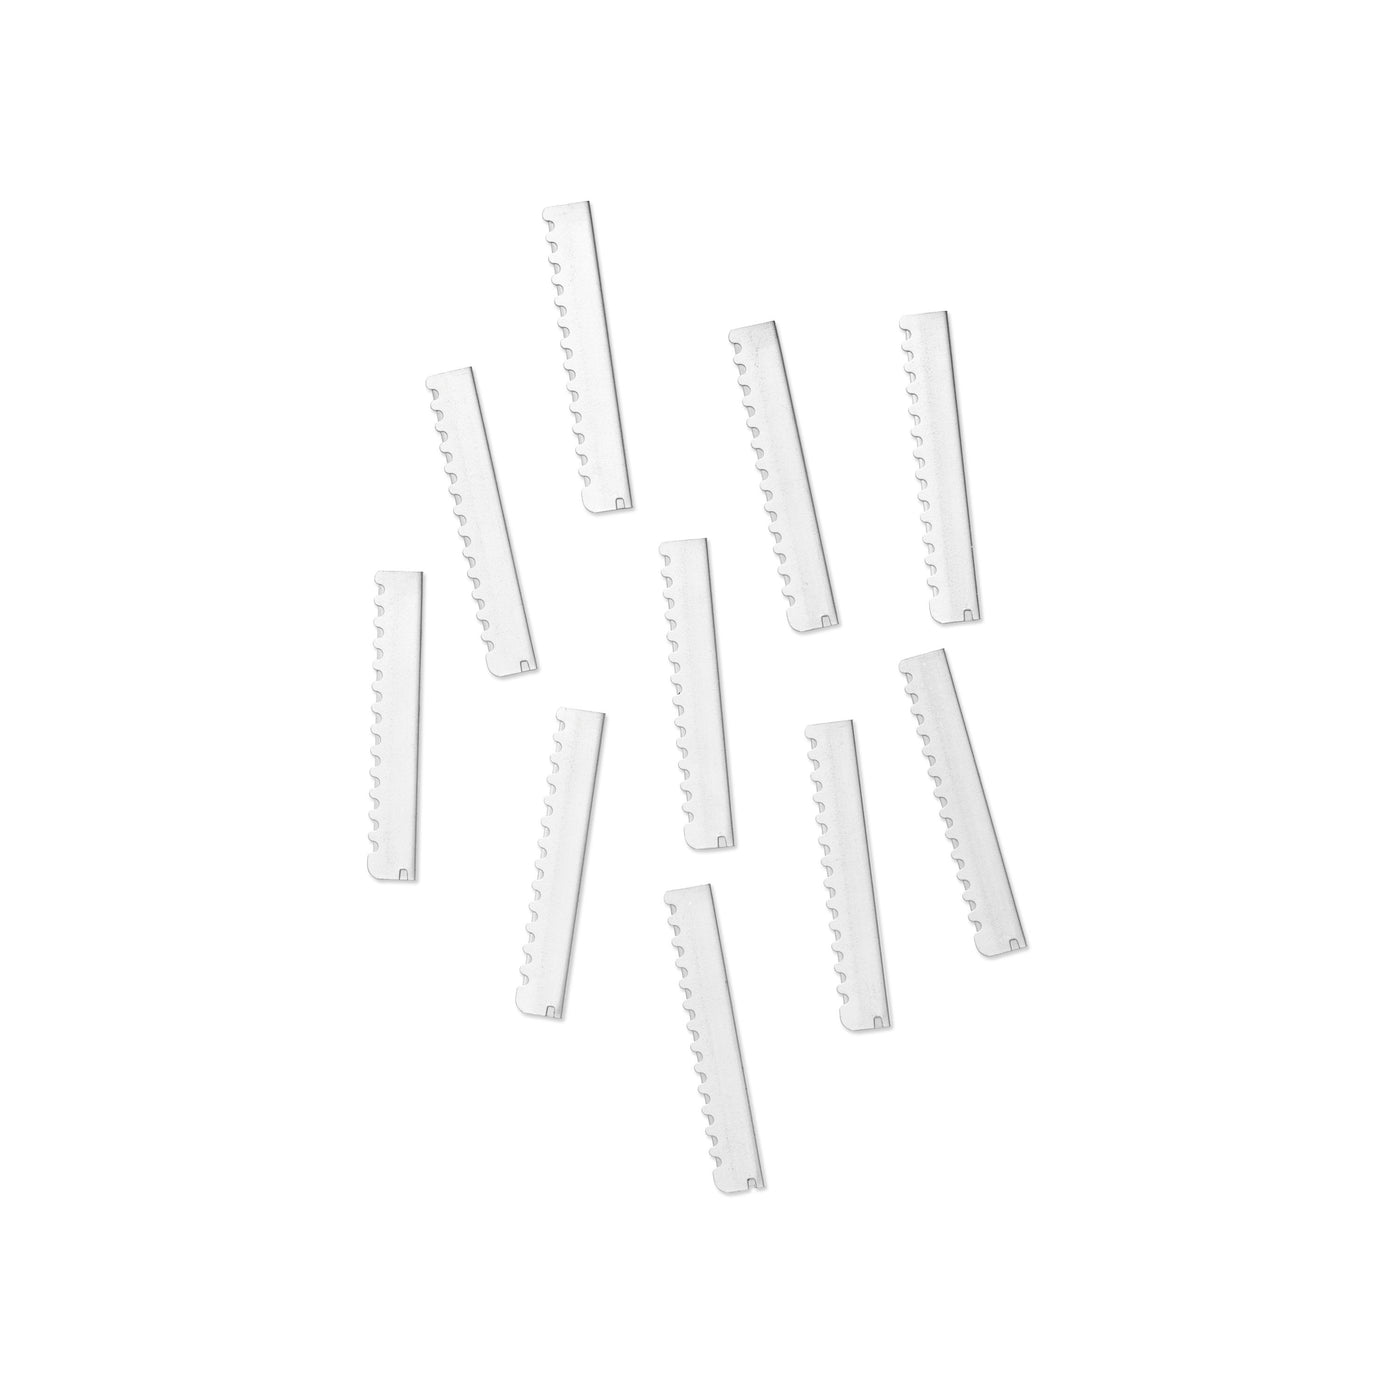 Replacement blades for Leaf Razor